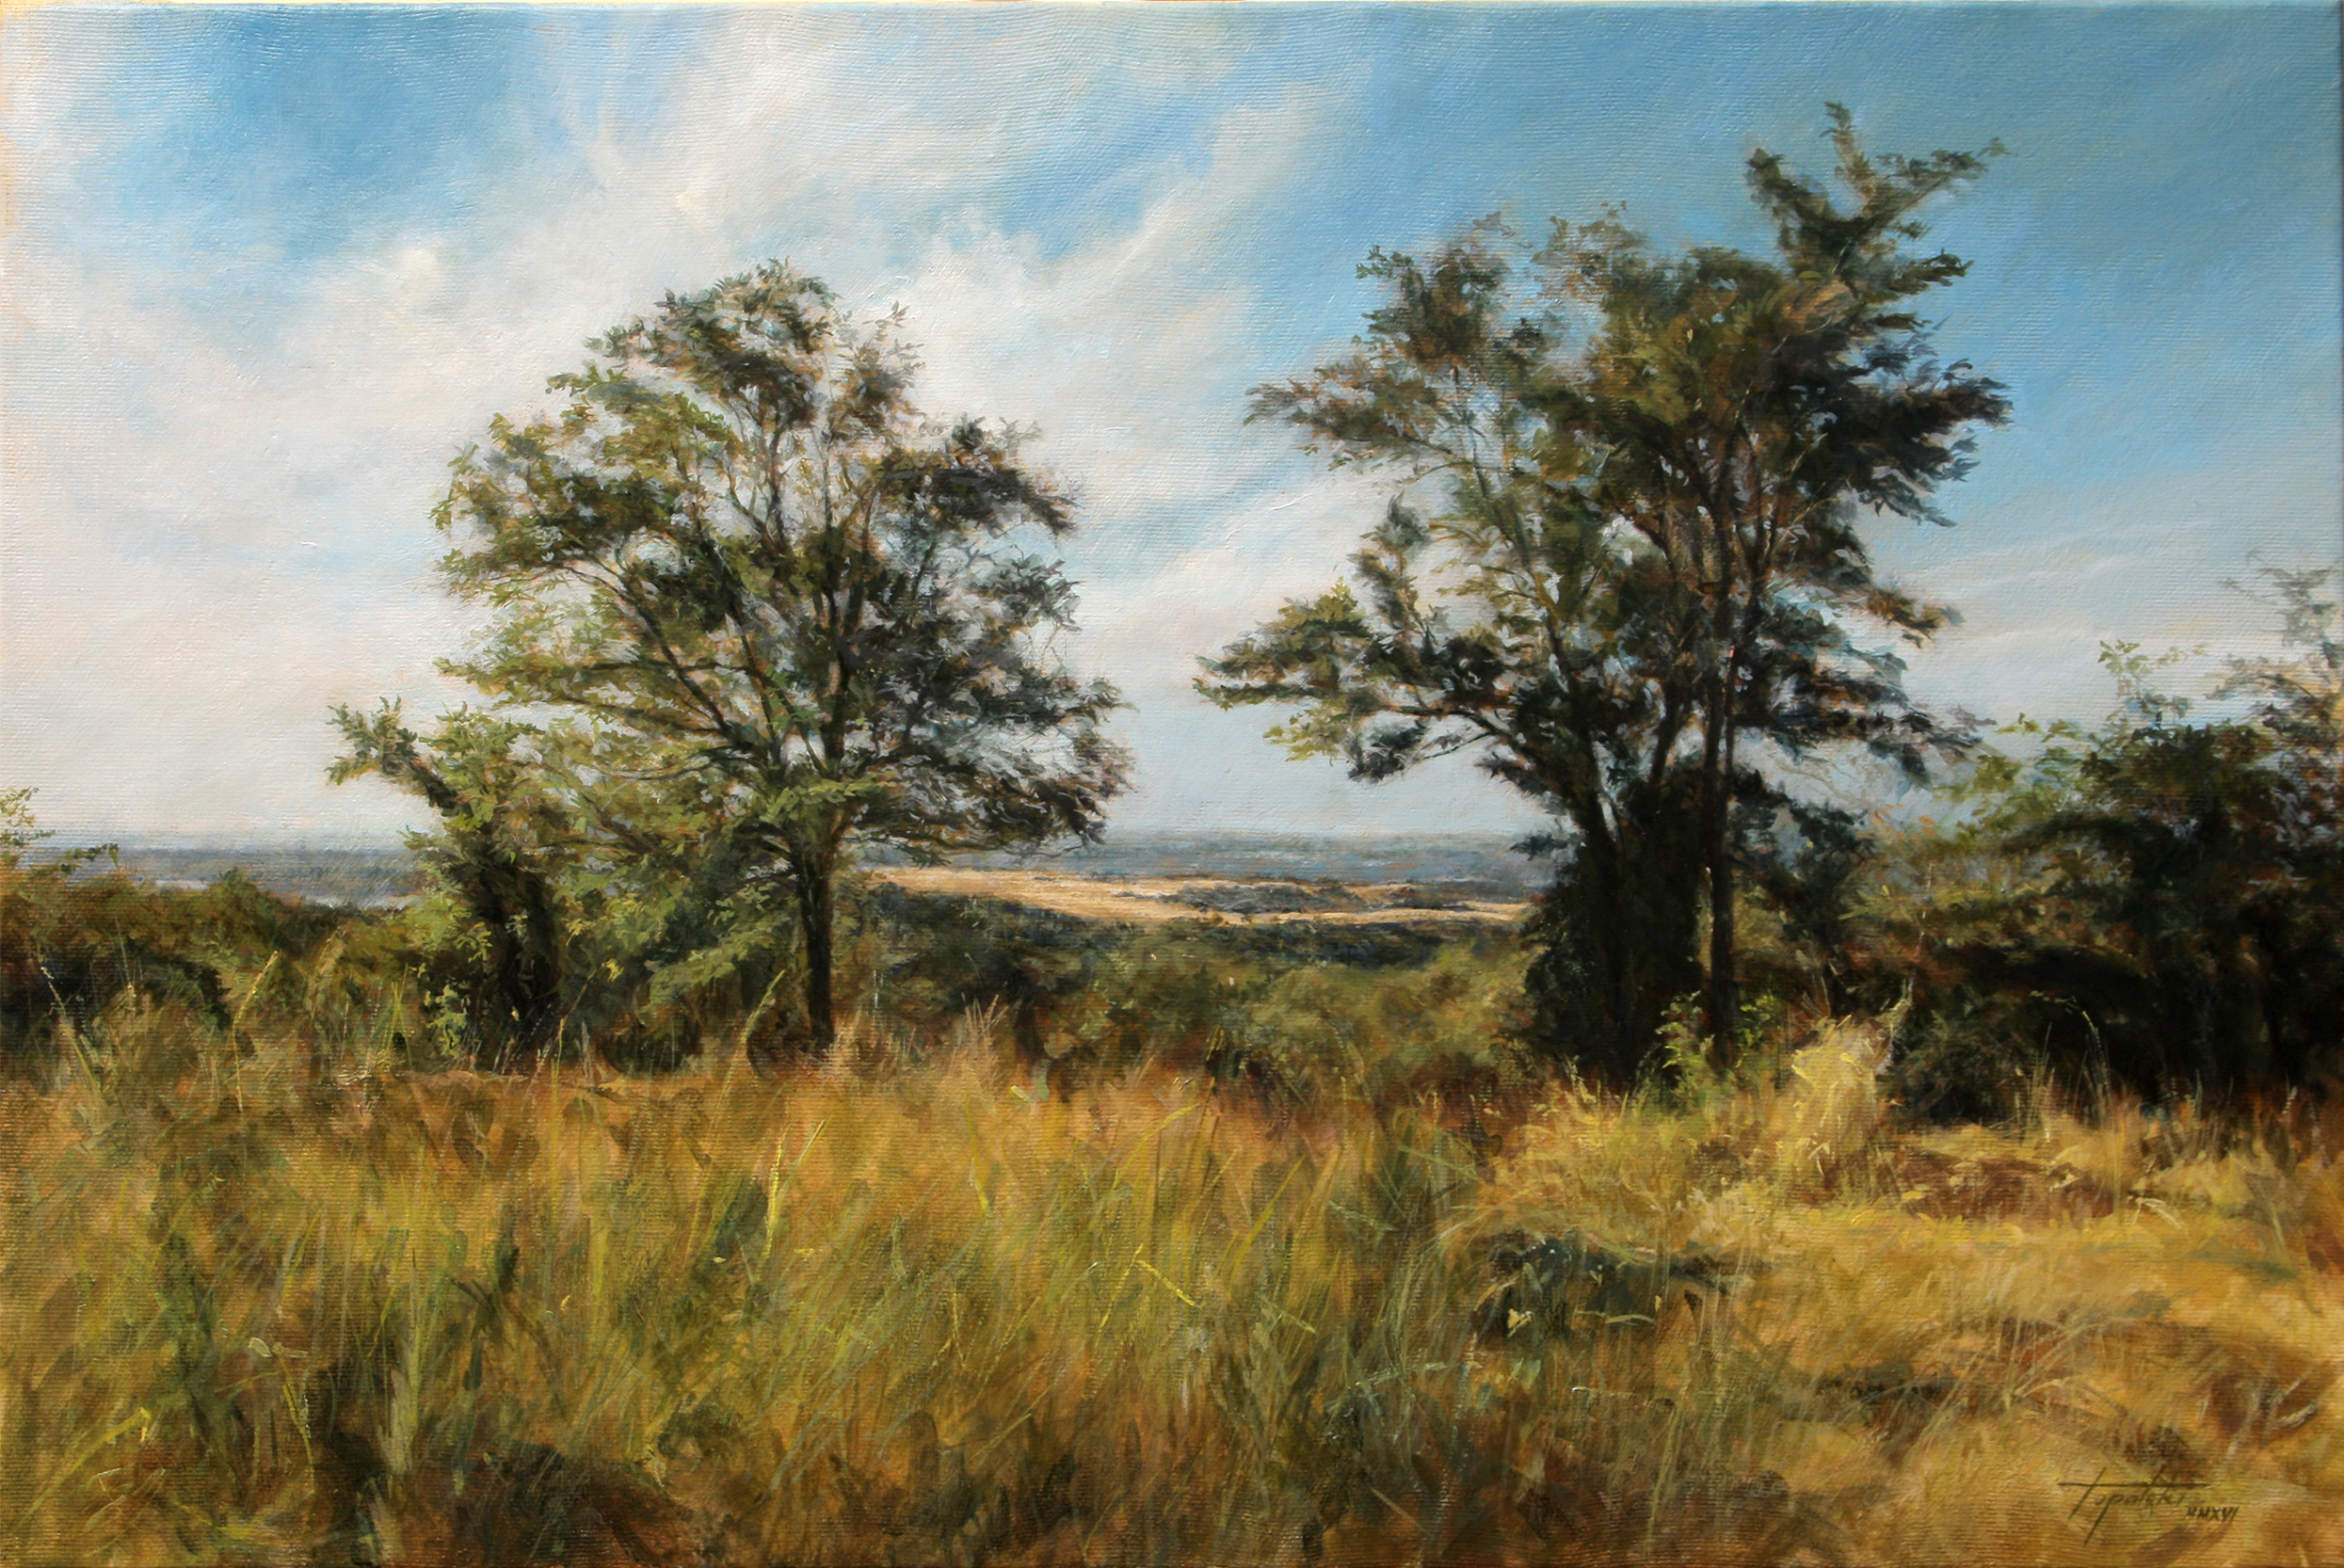 In the Country - Landscape oil painting - Fine Arts Gallery - Original